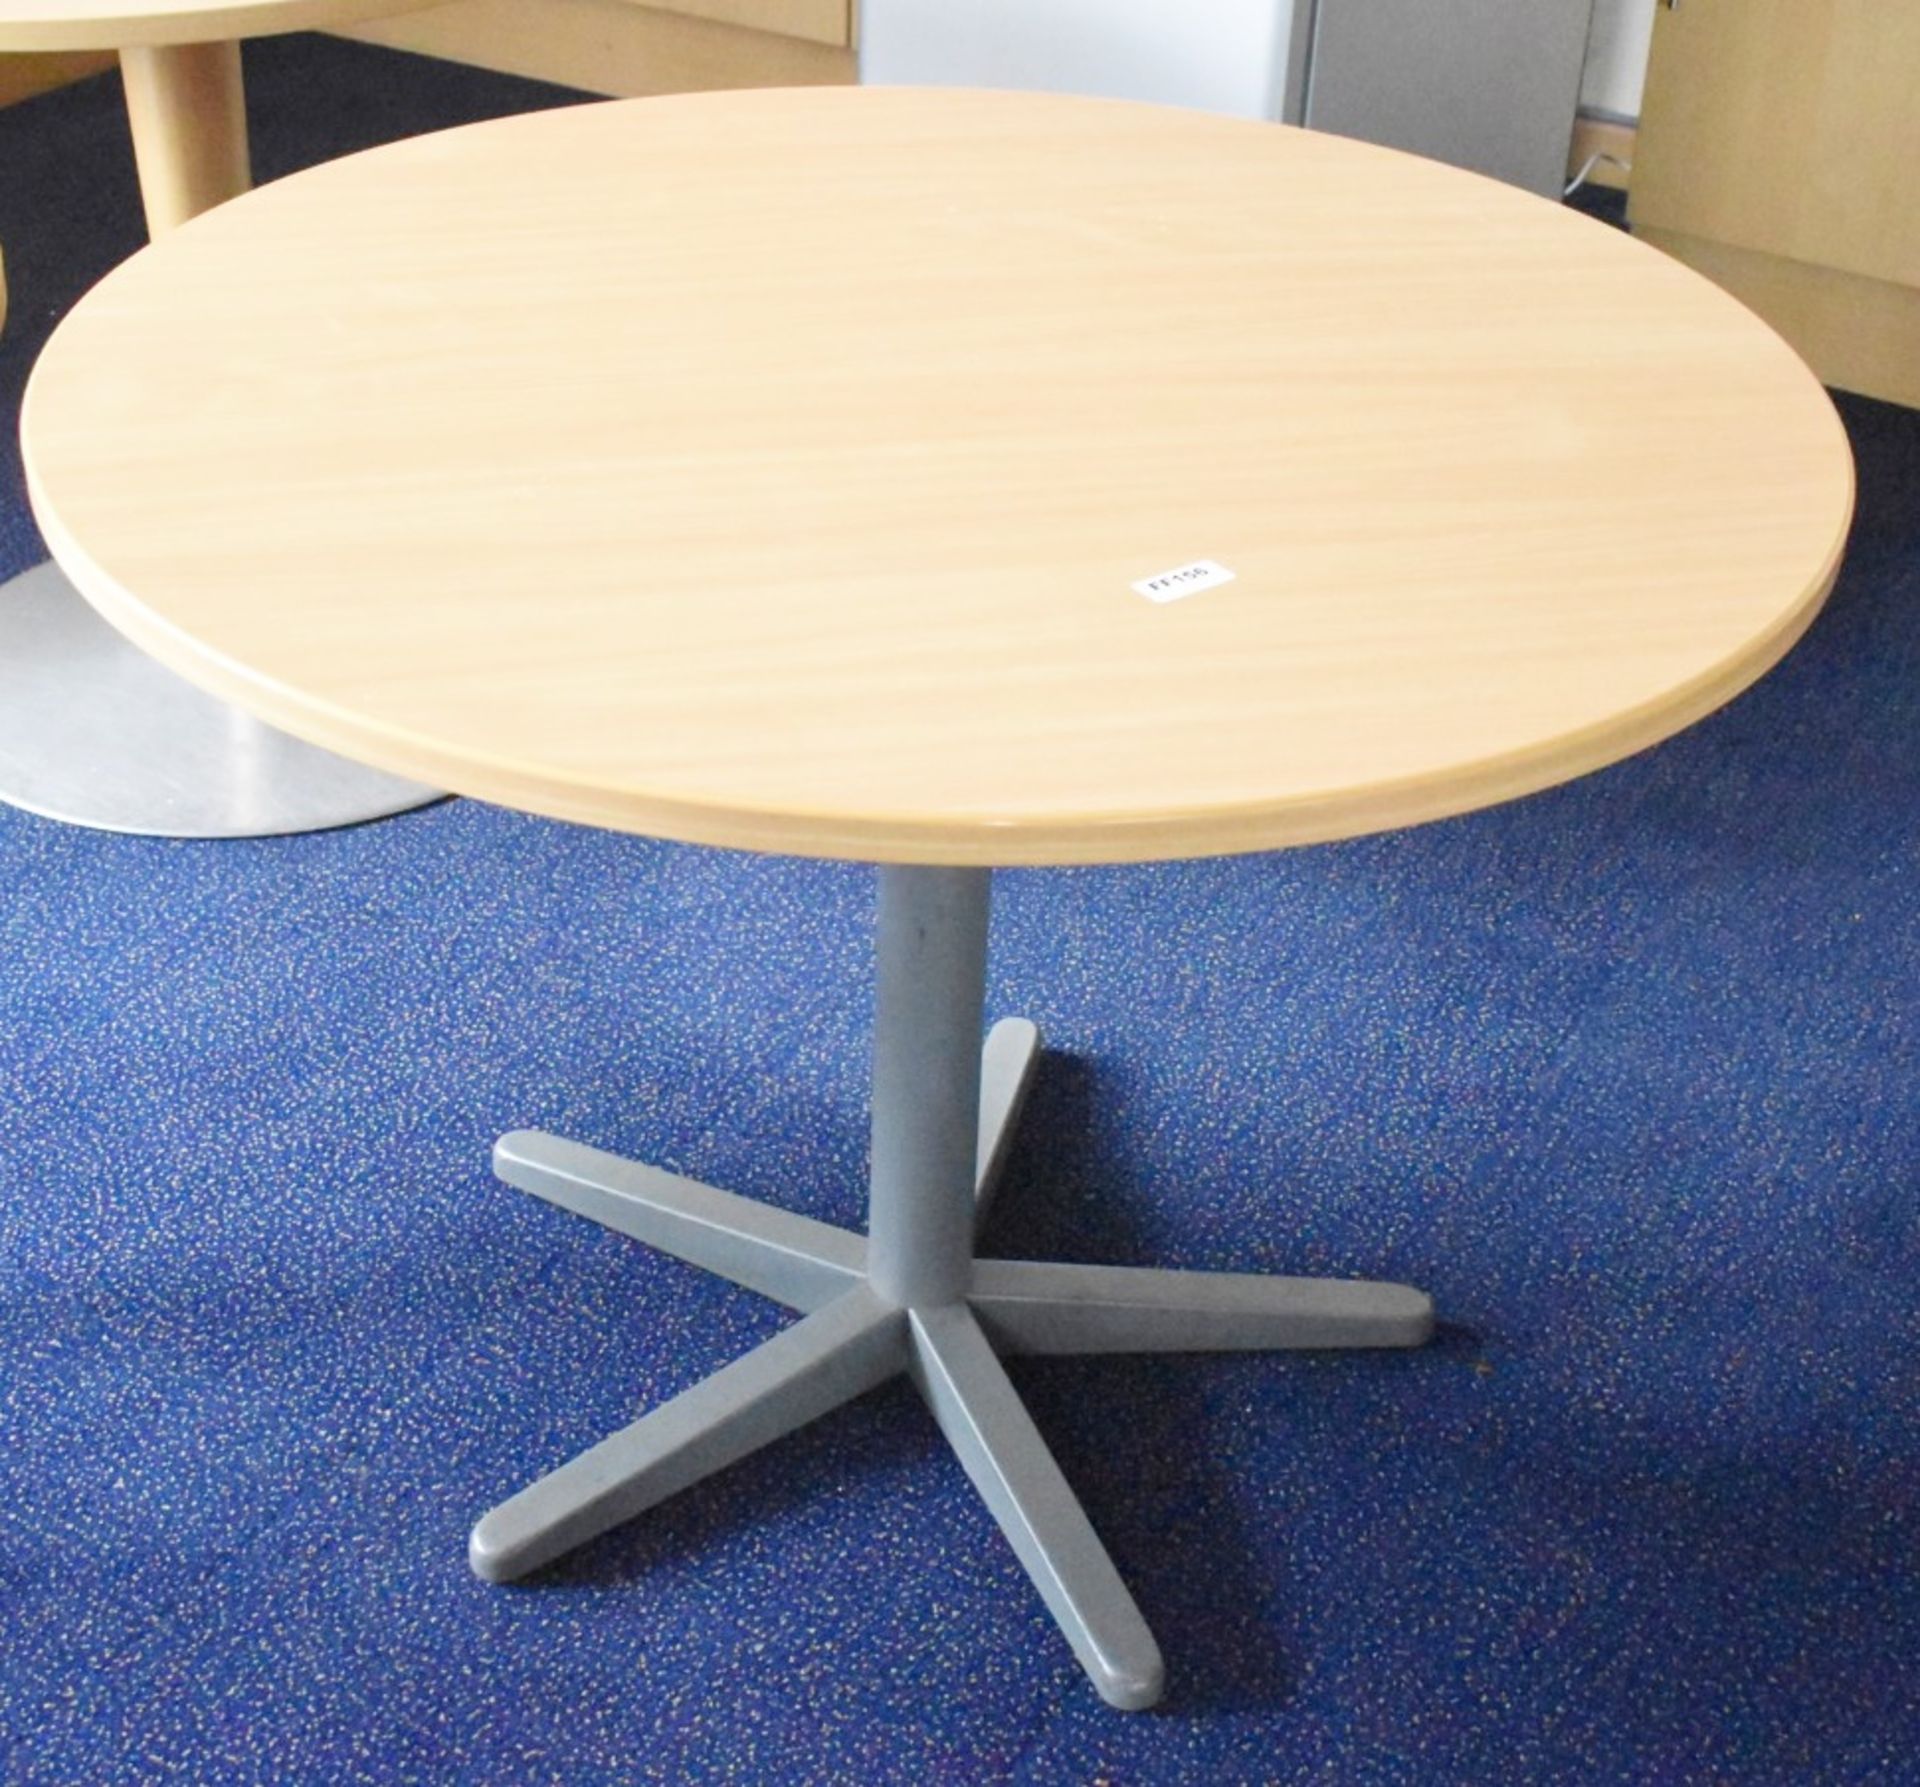 3 x Round Canteen Staff Room Tables in Beech With 8 x Plastic Chairs in Black and Red and 2 x Office - Image 2 of 5